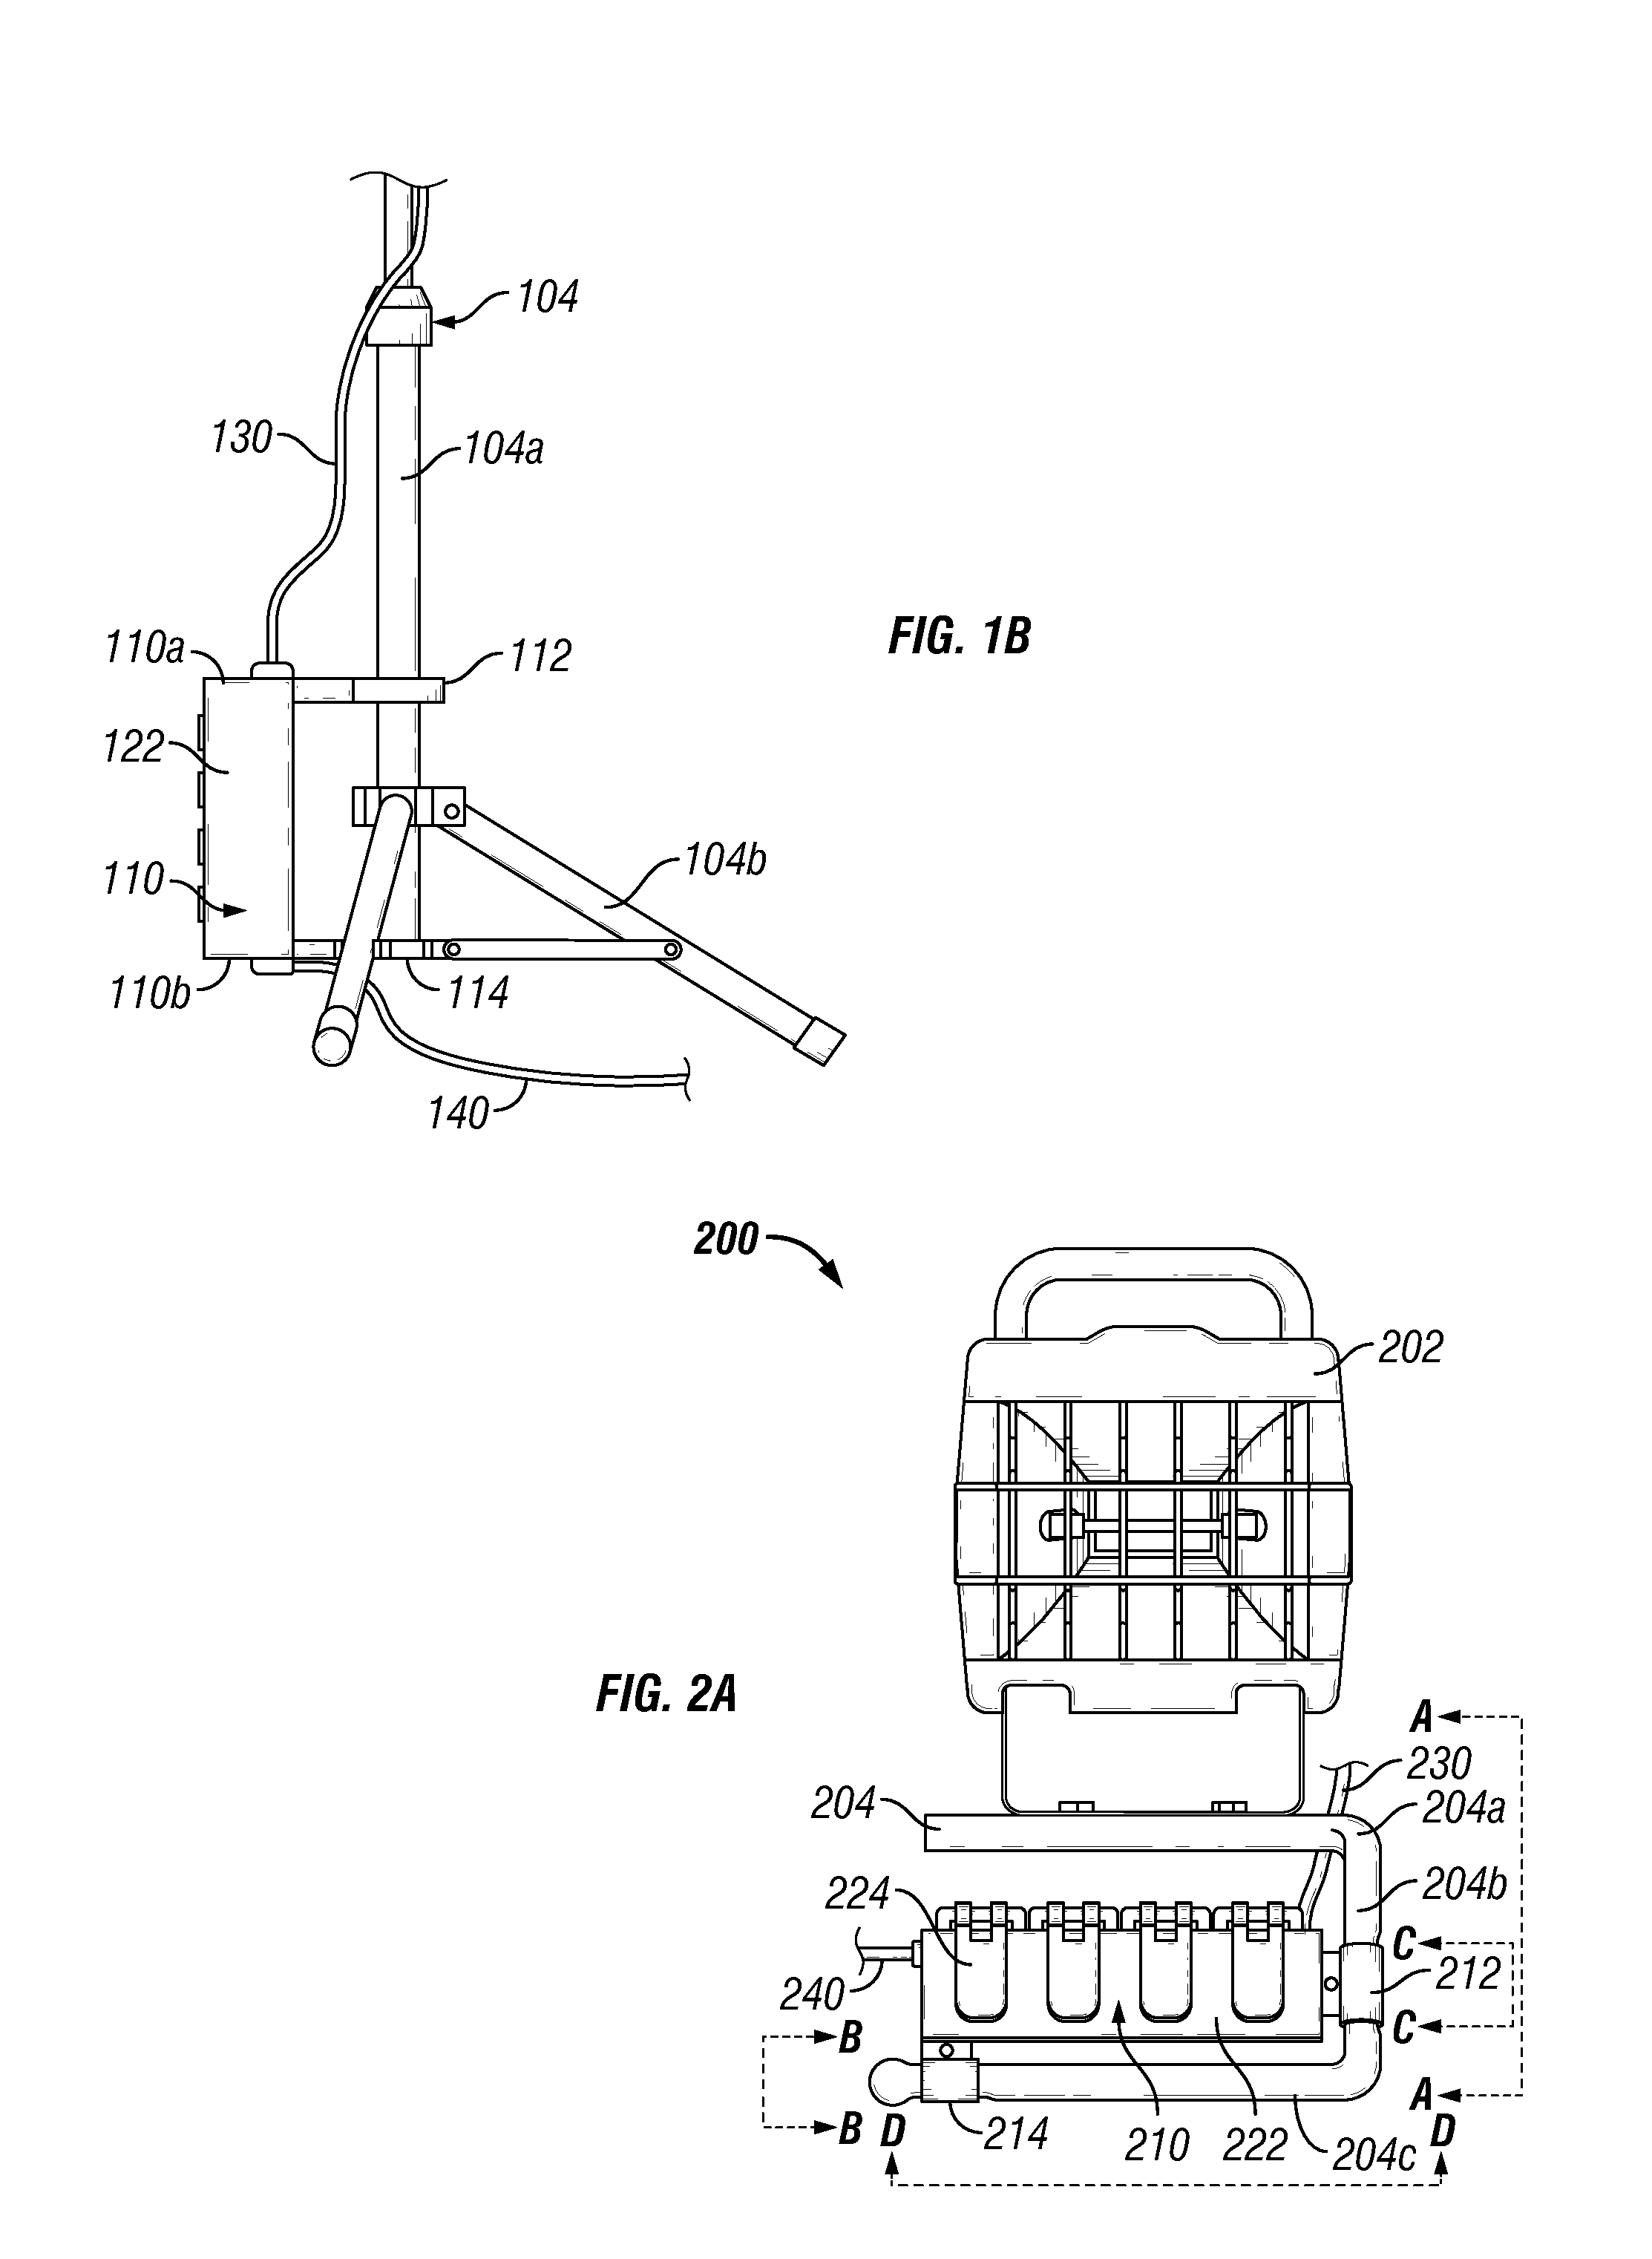 Methods And Apparatus For Enhancing Portable Worklight Features